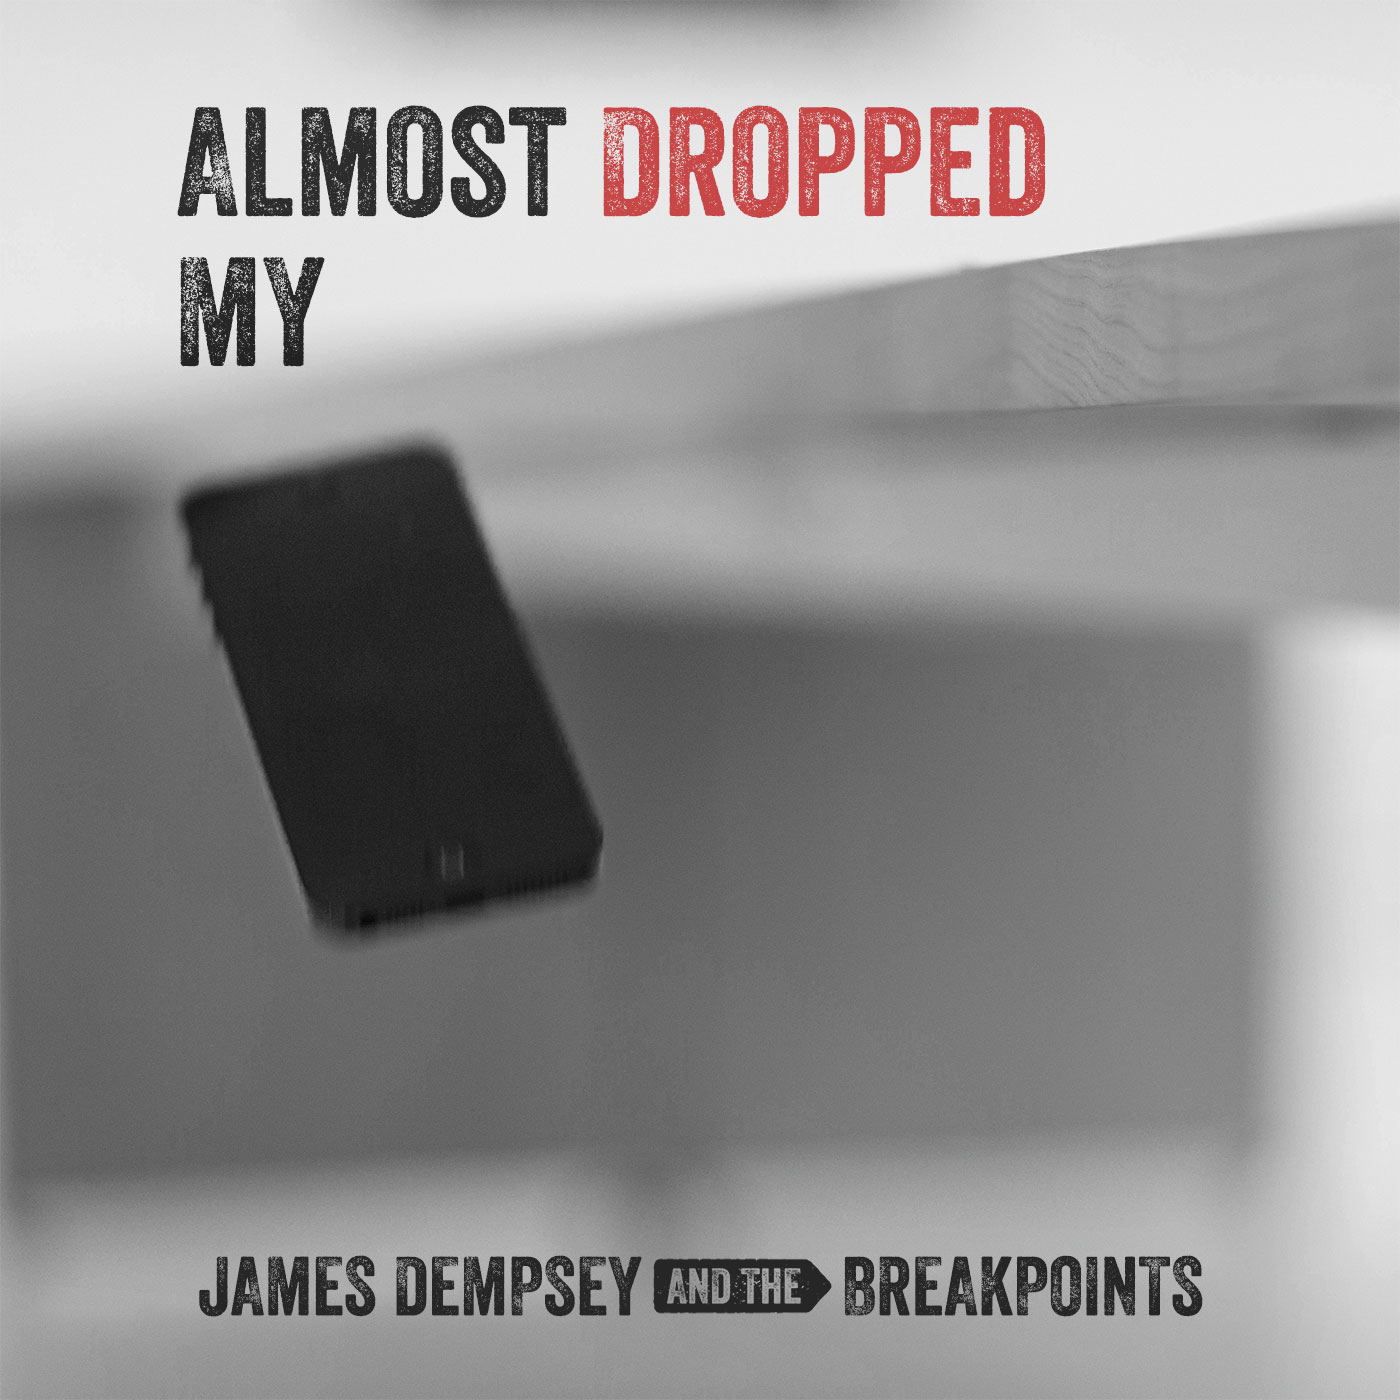 Cover art for 'Almost Dropped My iPhone' by James Dempsey and the Breakpoints. A black and white photo showing an iPhone in midair.